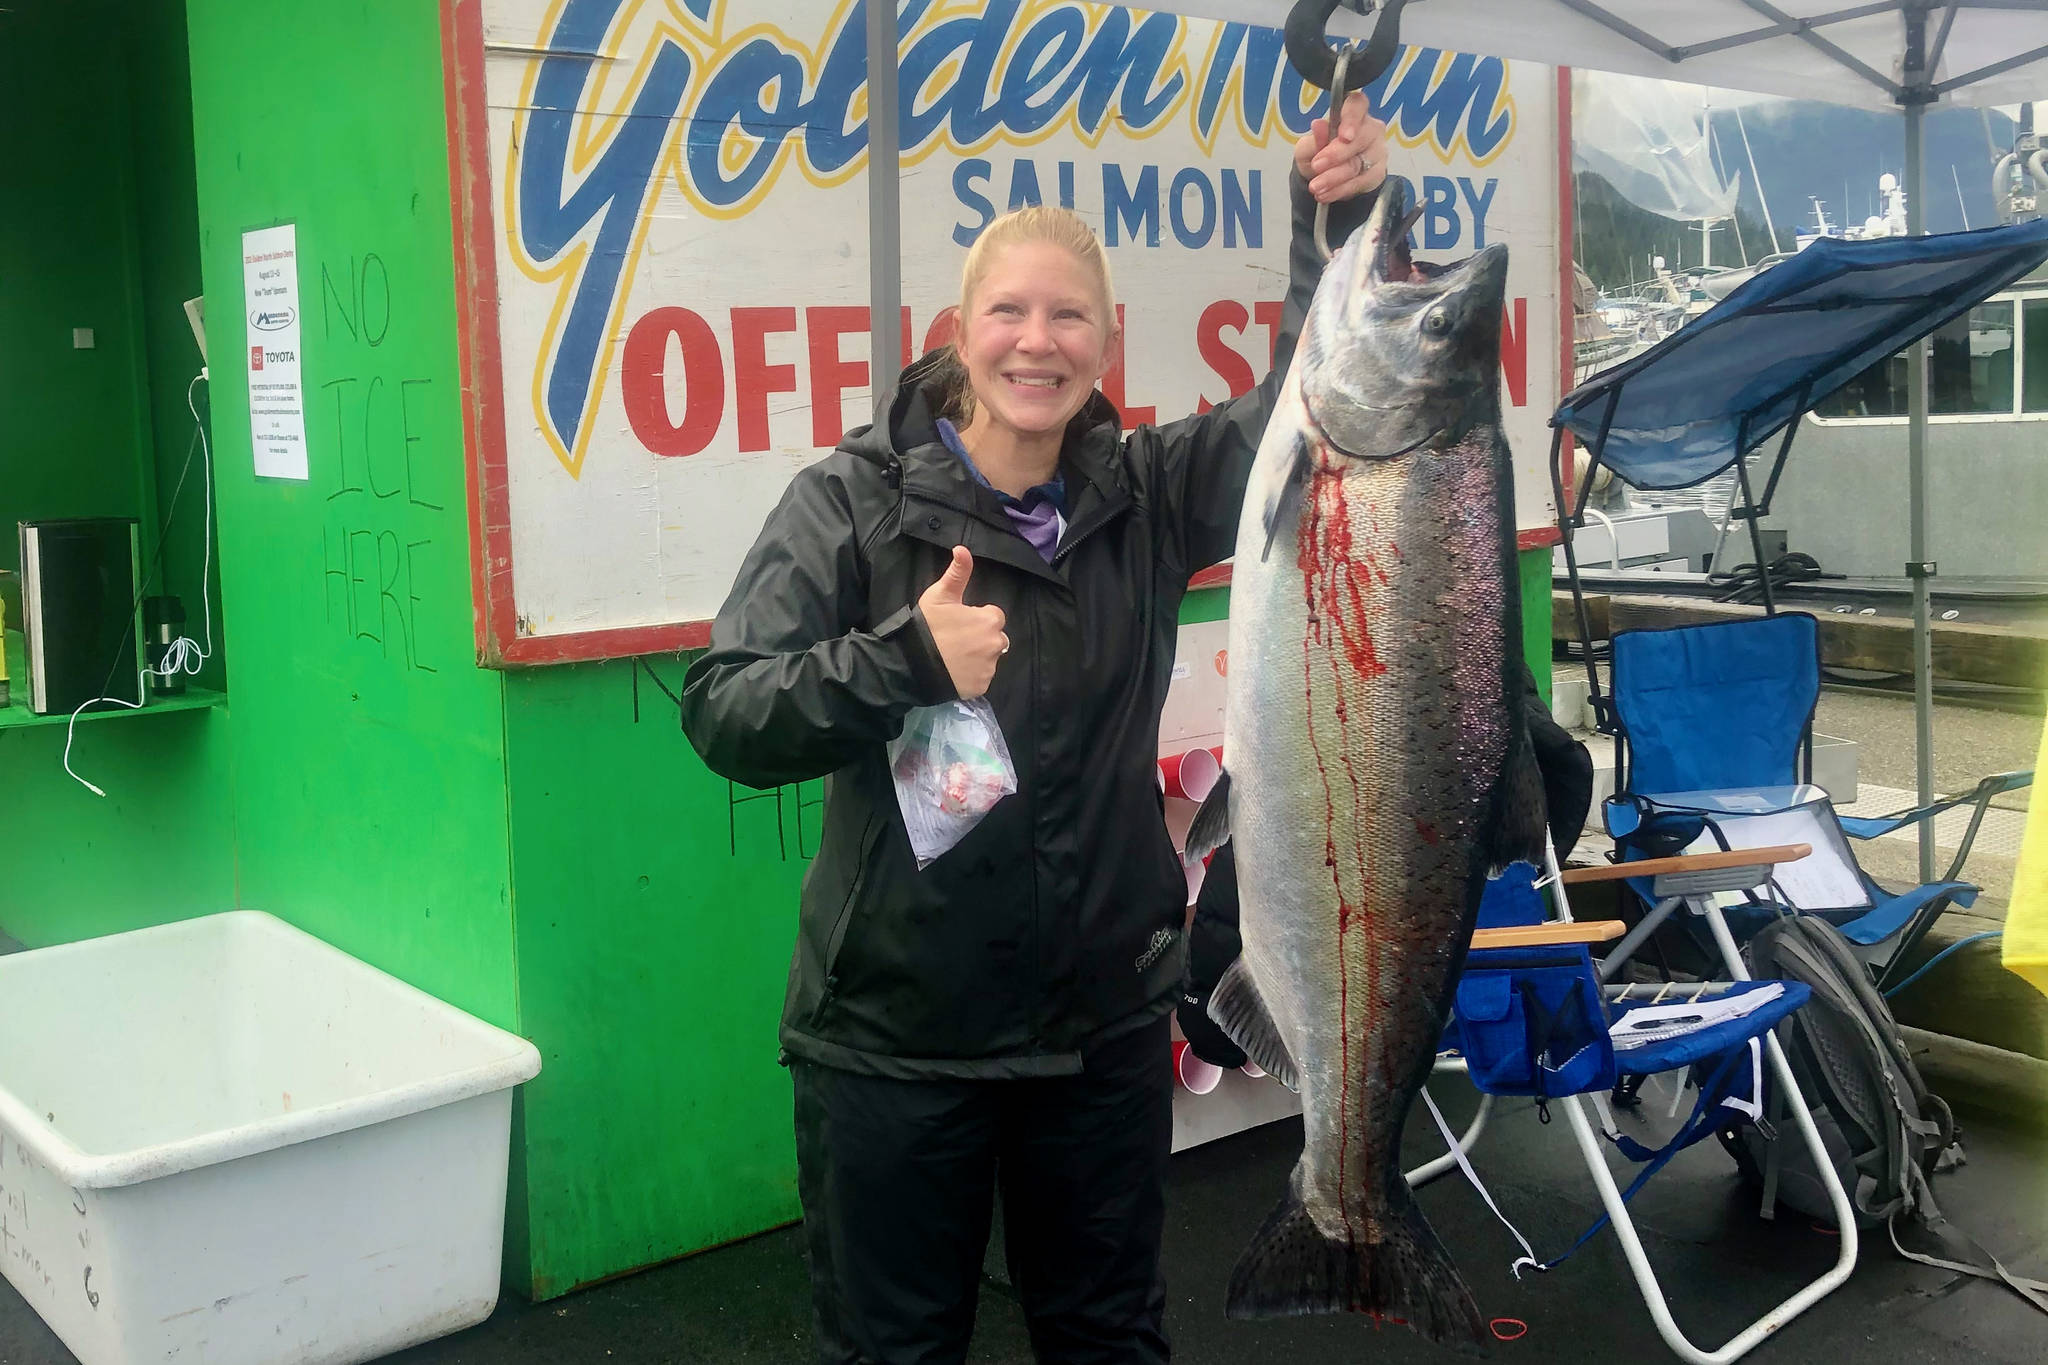 Tiffany Listberger poses with her 31.7-pound king salmon turned in at the Auke Bay weight station on Sunday. According to provisional results, Listberger is the winner of the 75th annual Goldern North Salmon Derby. (Courtesy photo / Derek Listeberger)